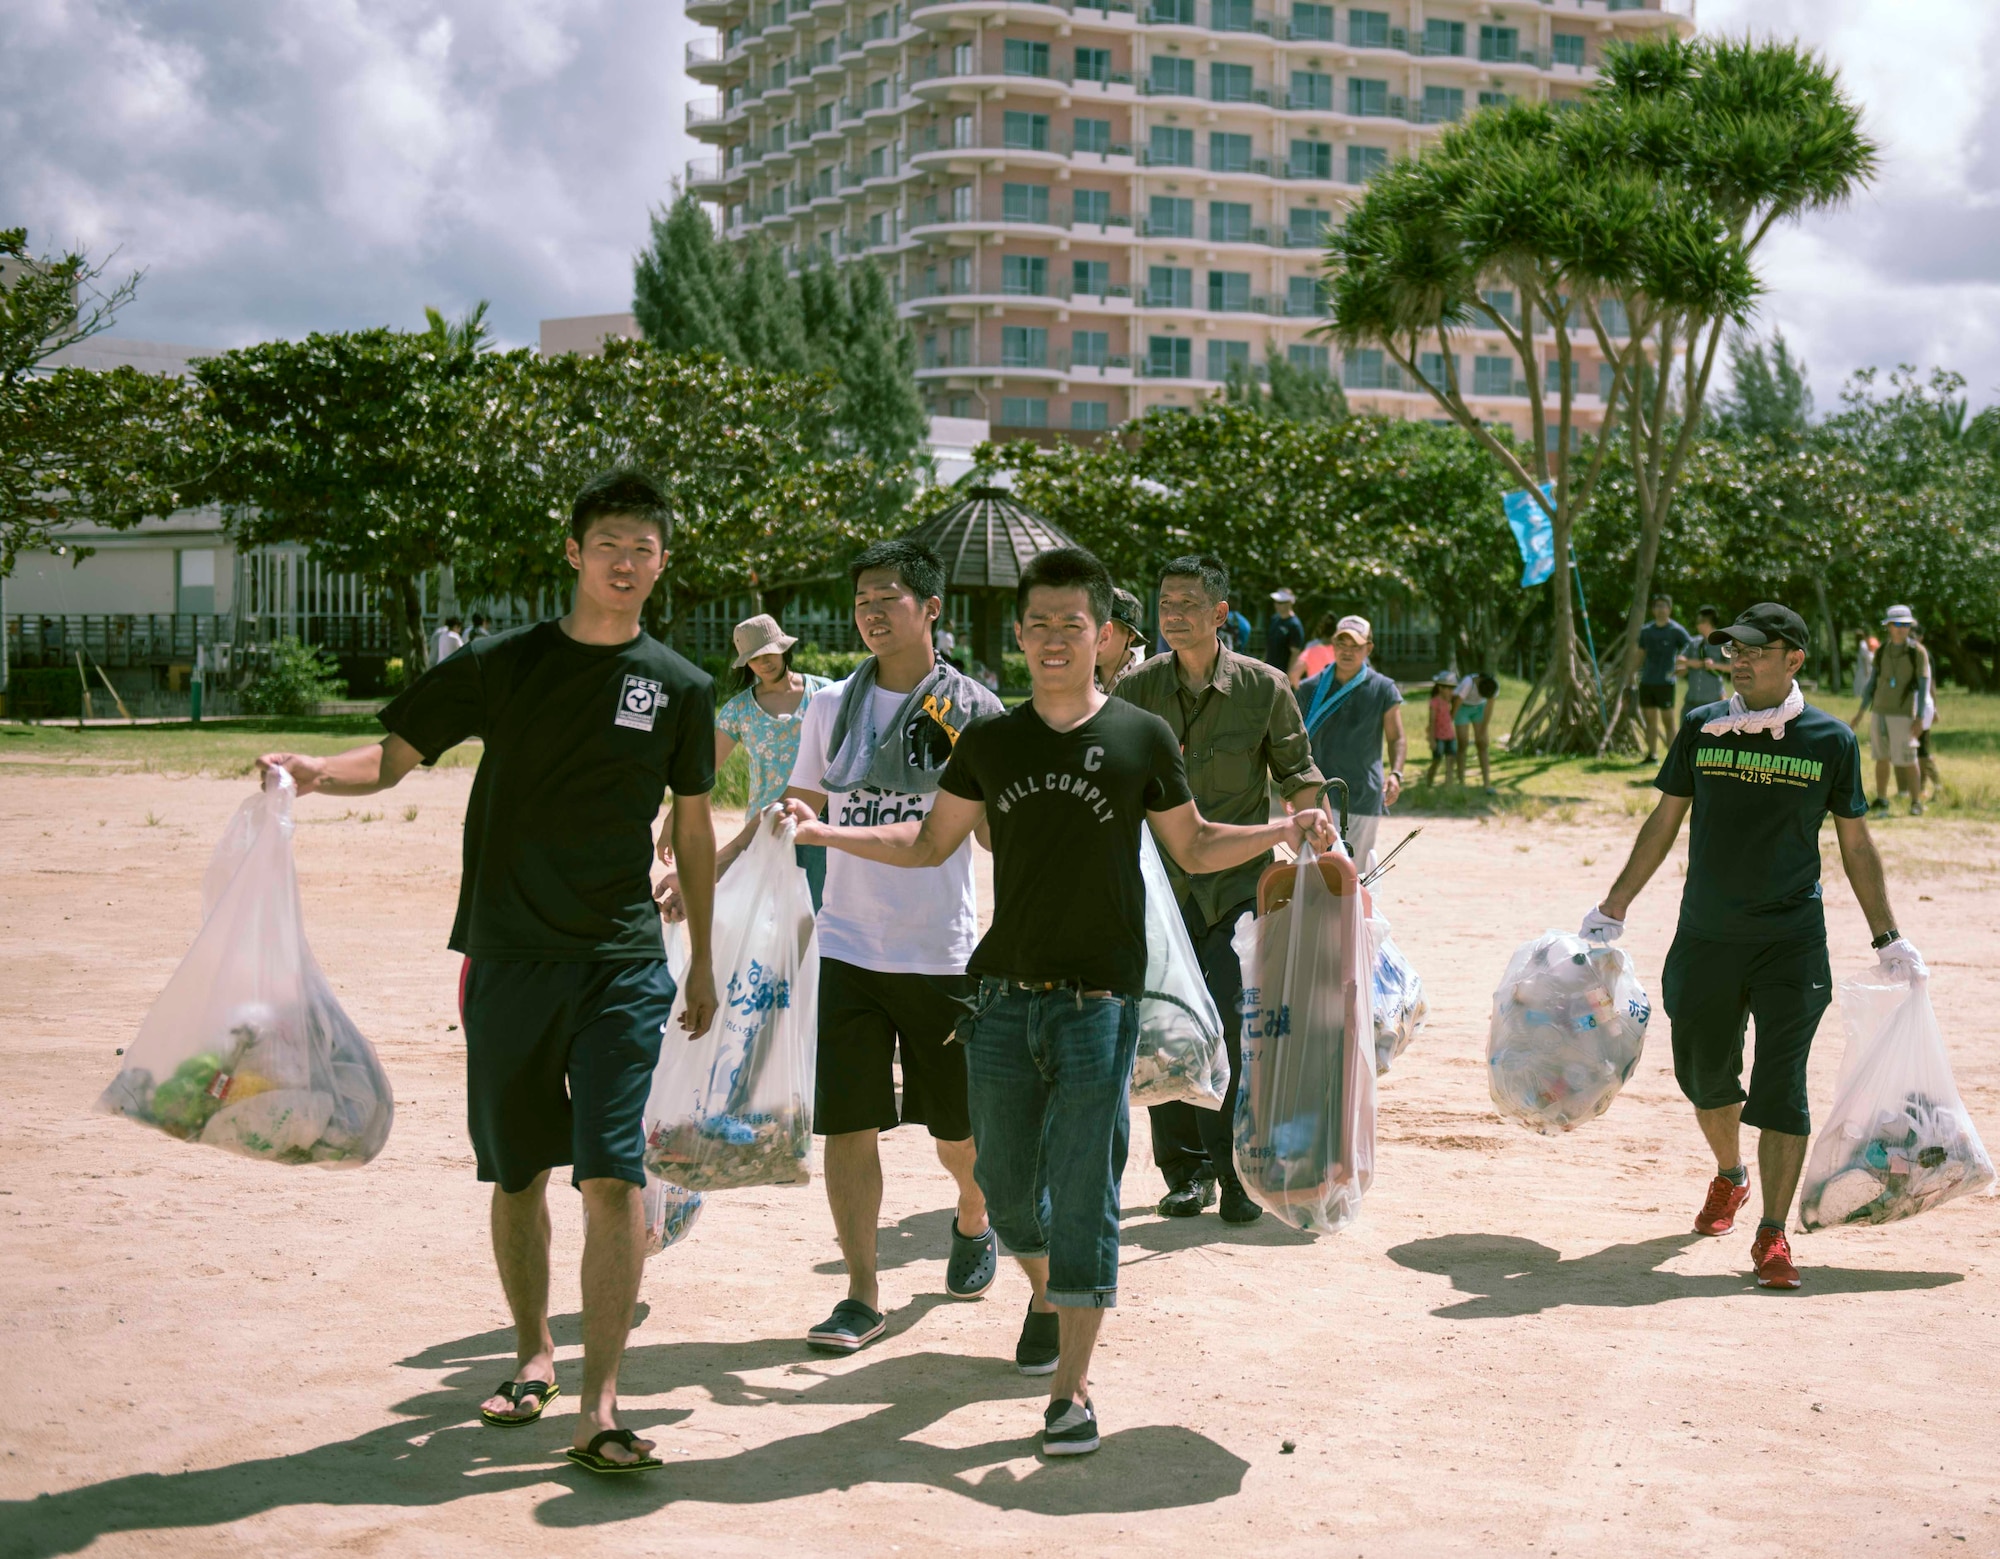 Japan Air Self-Defense Force members carry away trash collected during a beach cleanup Oct. 9, 2016, at Sunset Beach in Okinawa, Japan. Volunteers from Kadena and Naha Air Bases came together to build partnership and relations during the event. (U.S. Air Force photo by Senior Airman Omari Bernard)